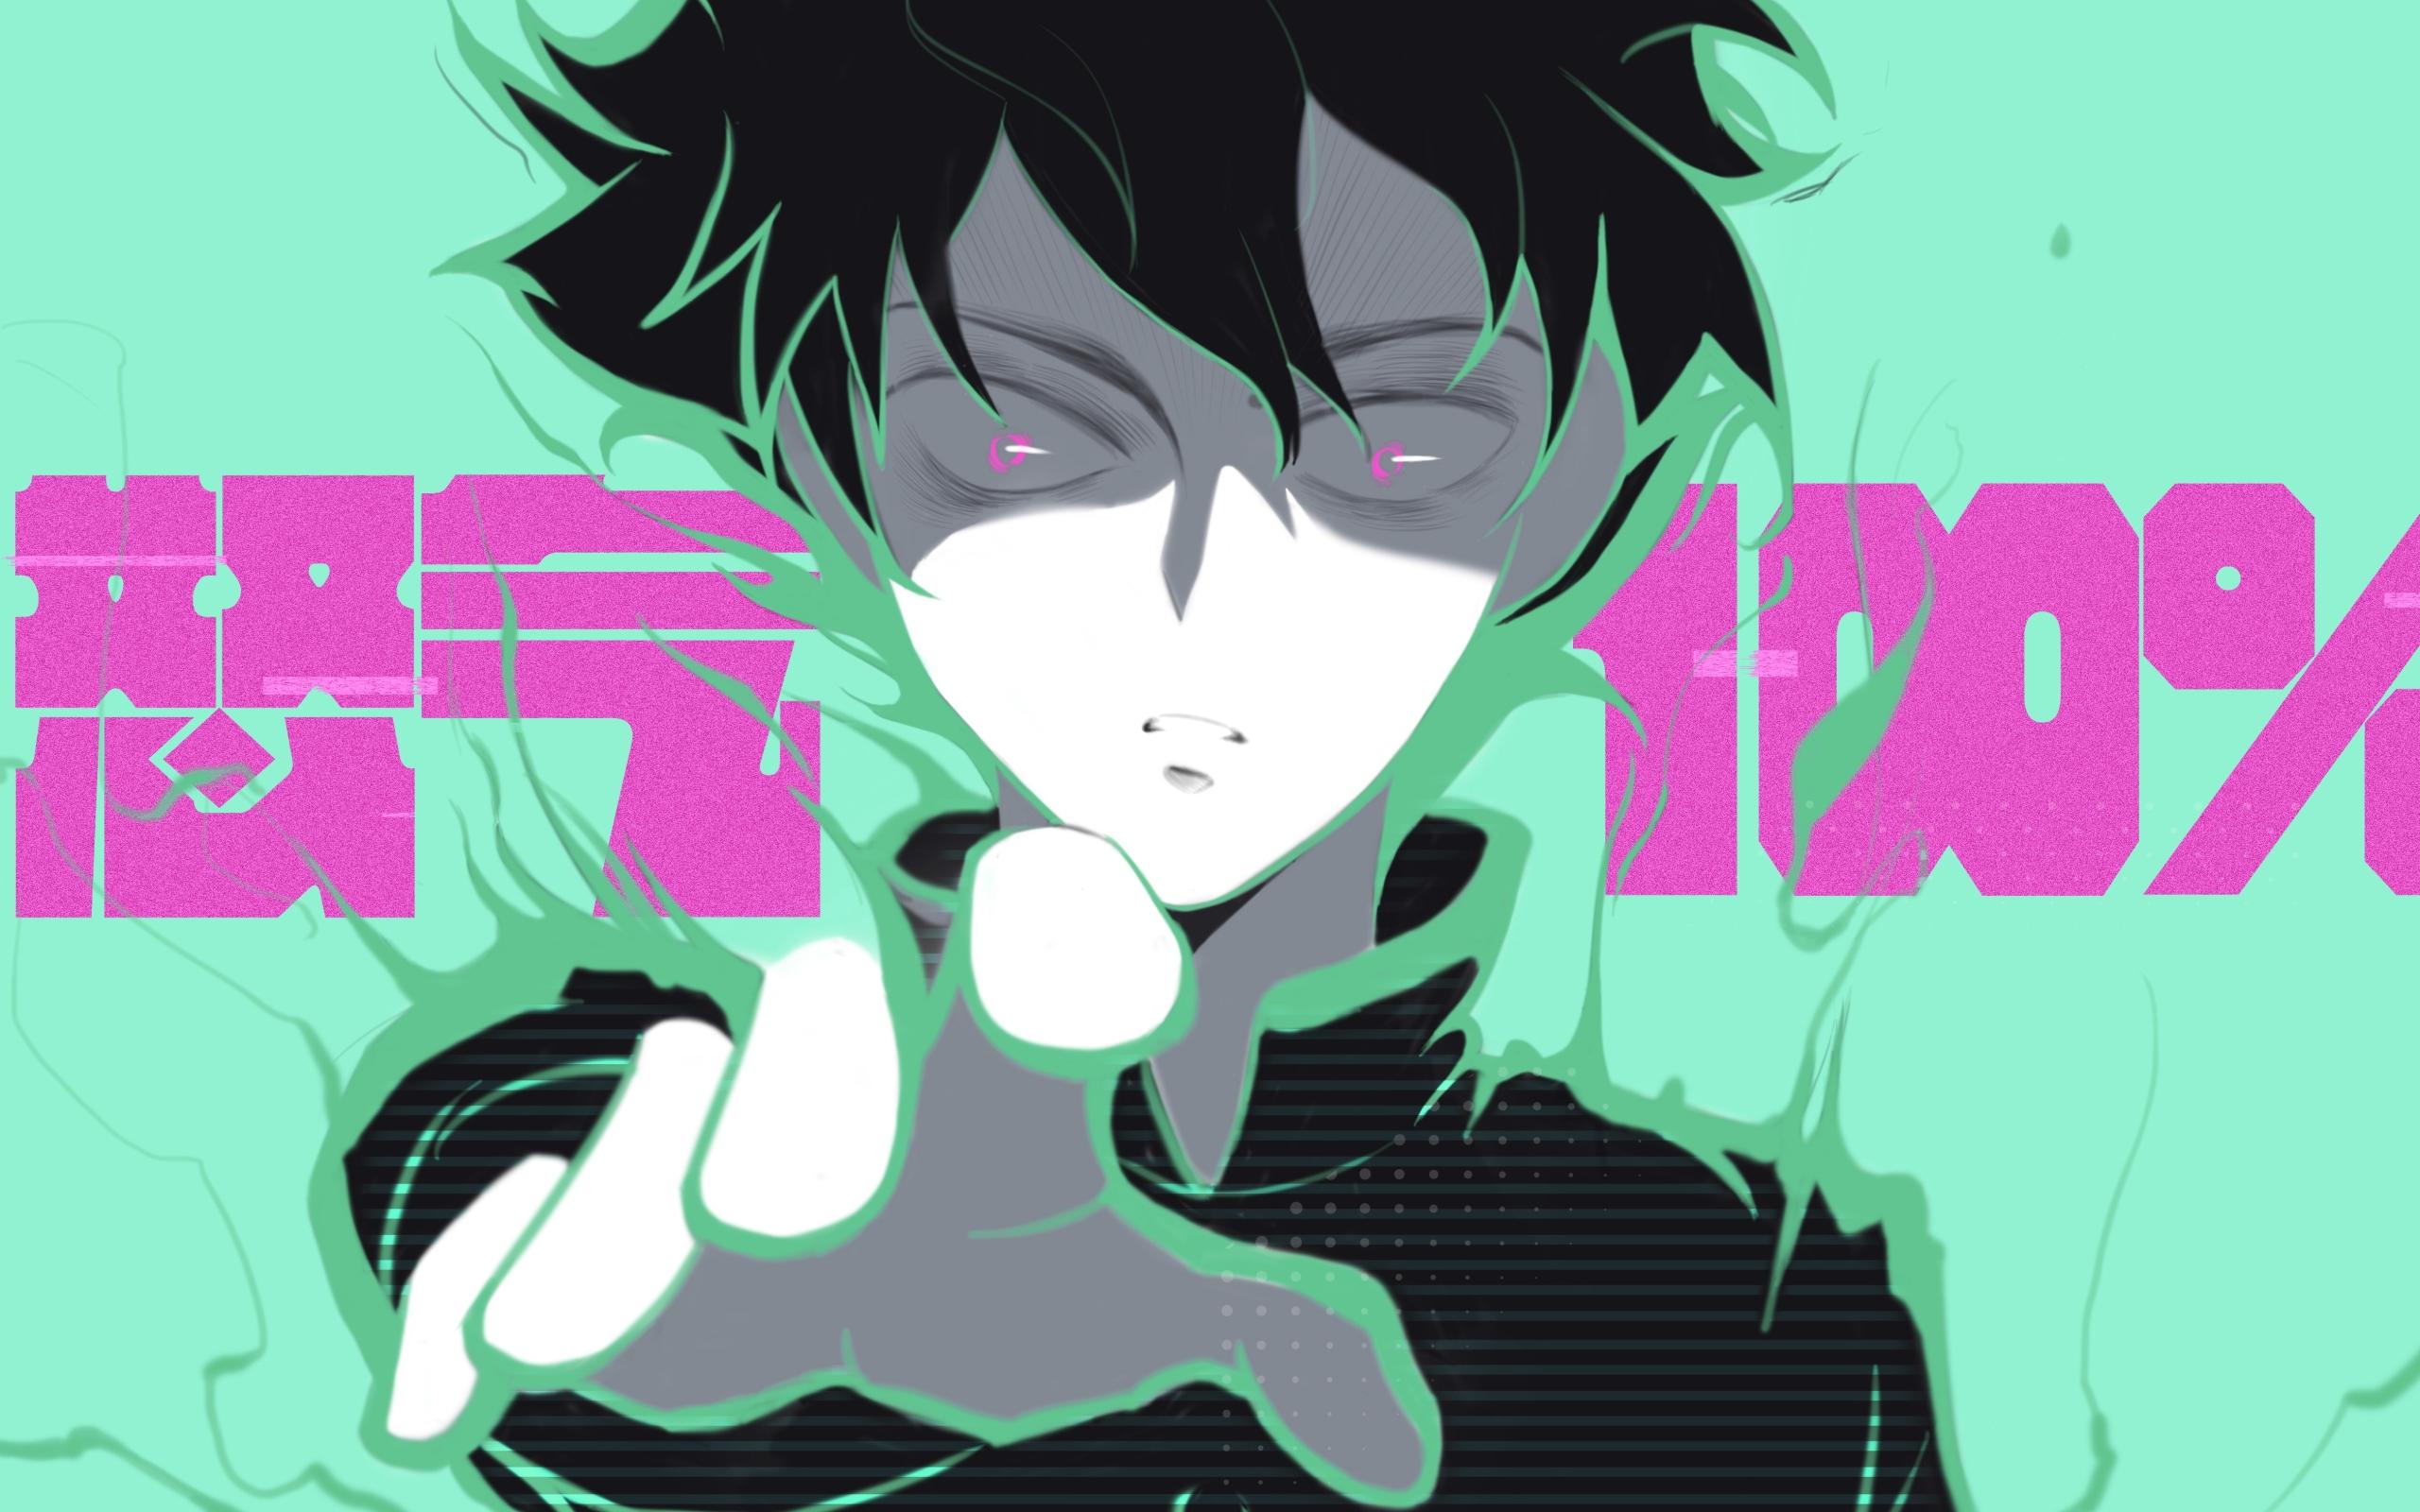 Mob Psycho 100 Wallpapers Top Free Mob Psycho 100 Backgrounds Images, Photos, Reviews